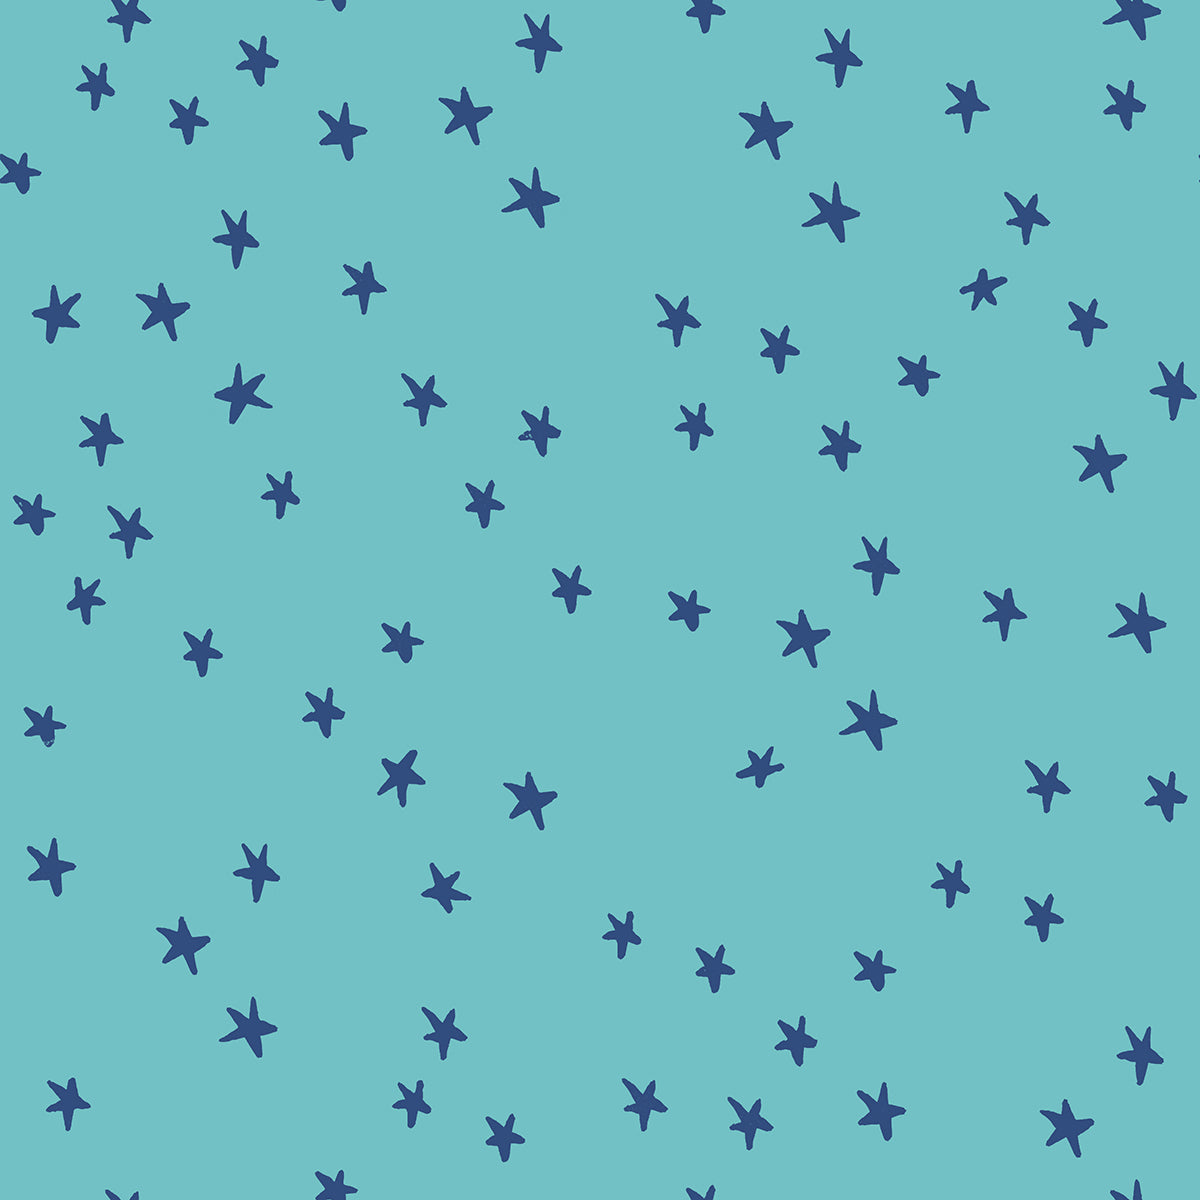 Starry in Turquoise by Alexia Abegg for Ruby Star Society